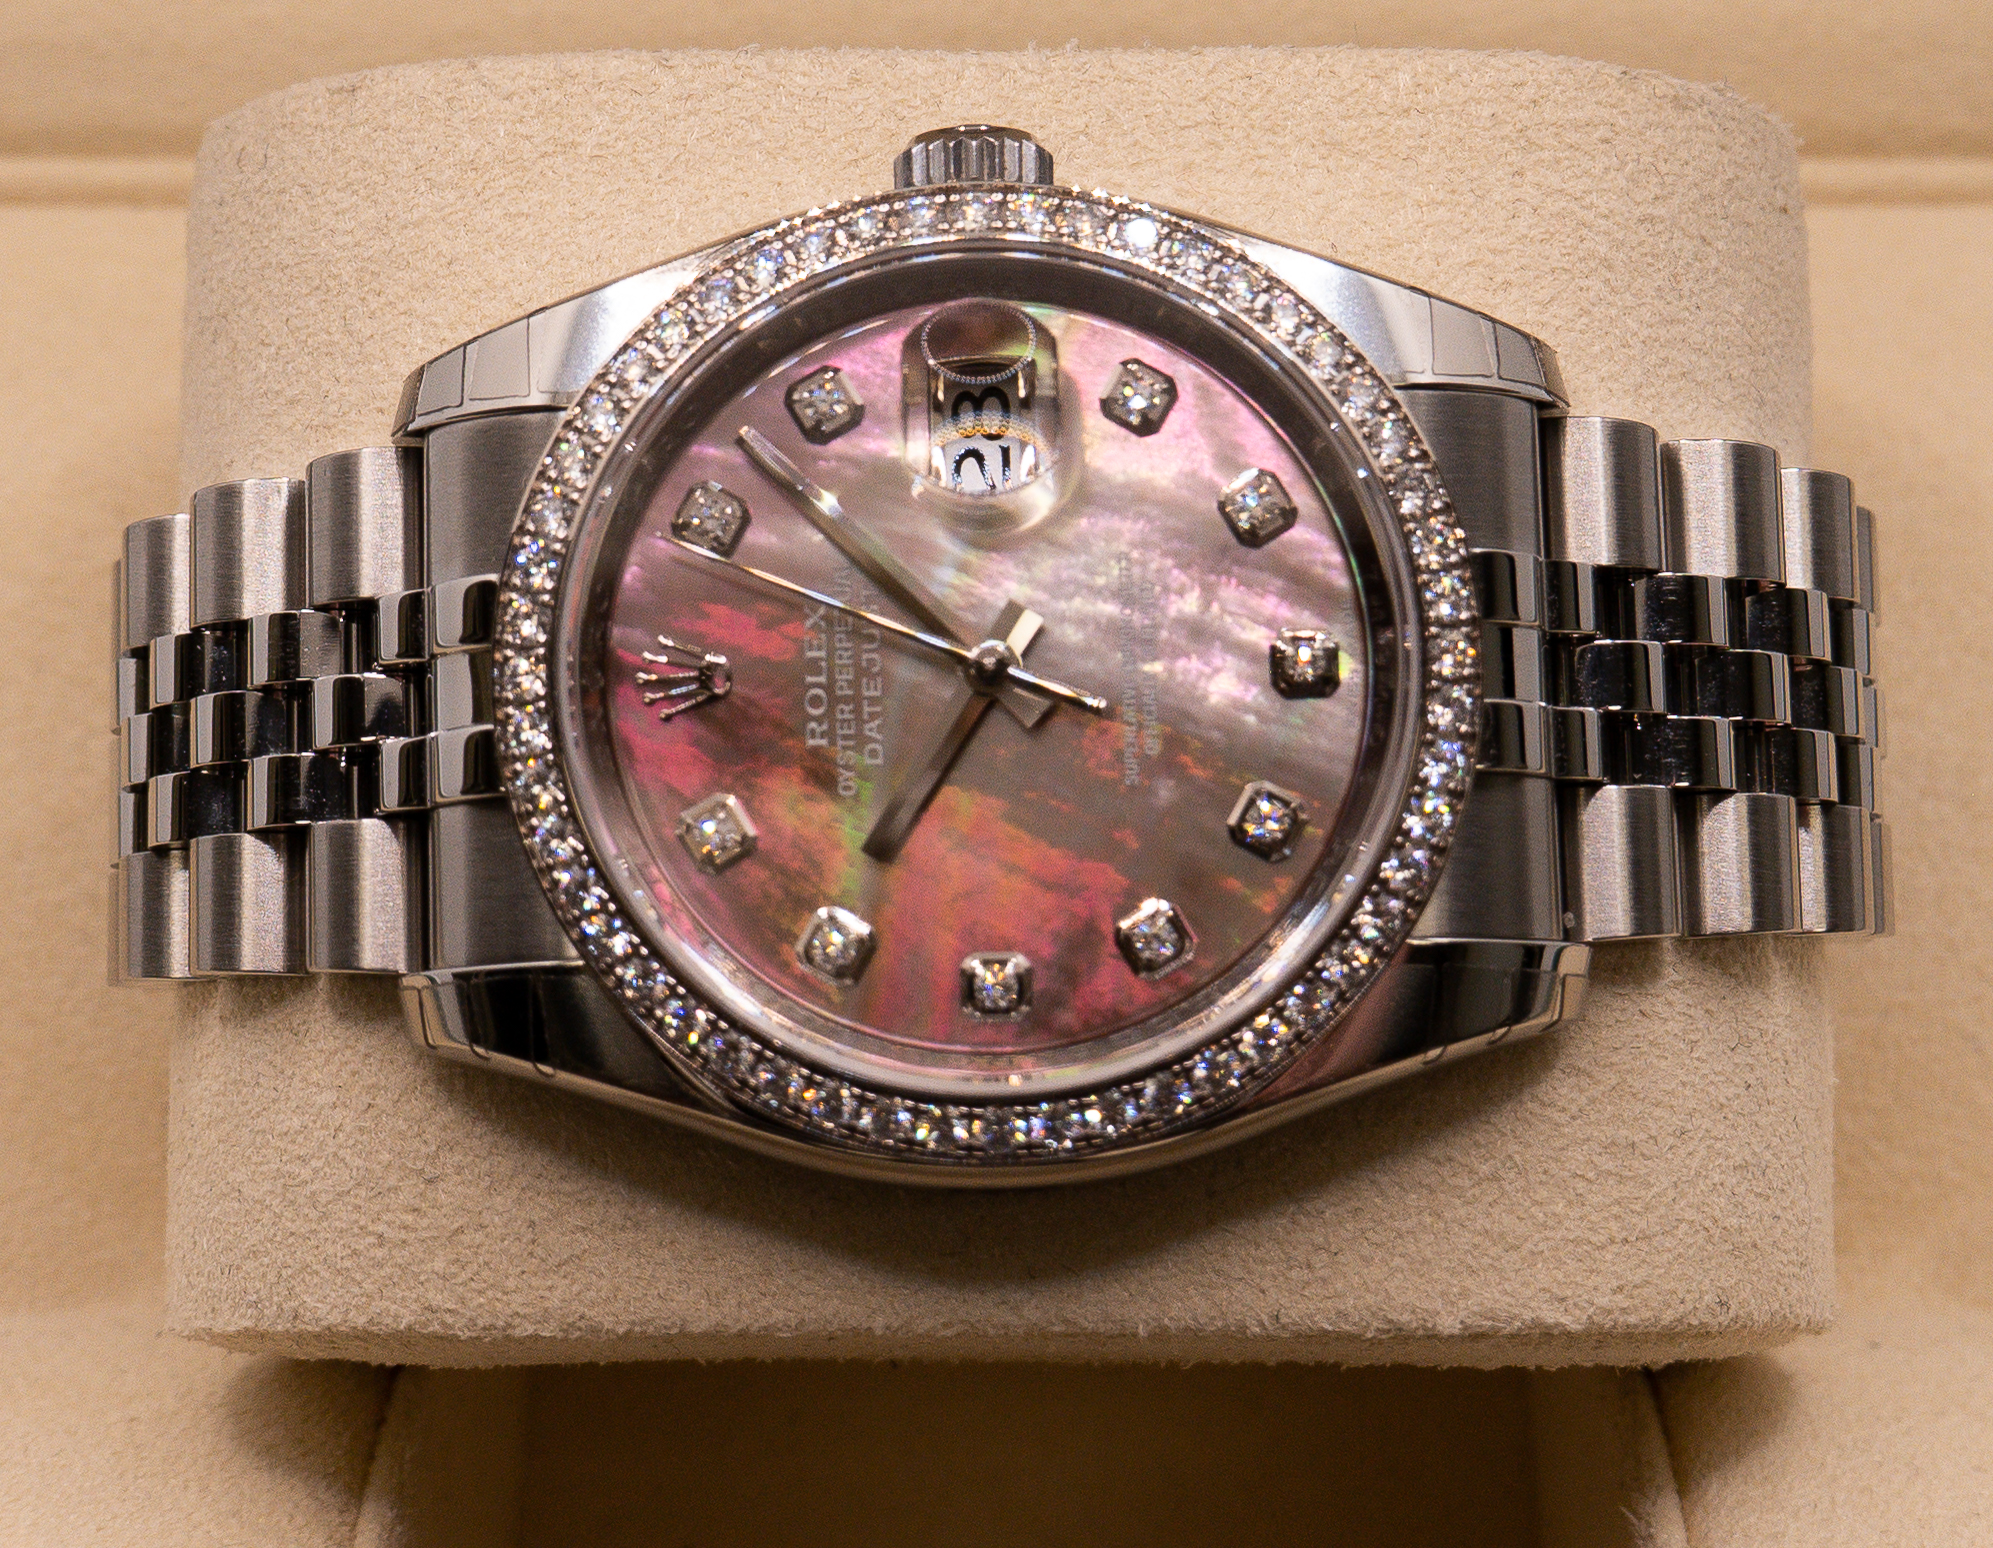 One of our Rolex watches that was available in our Buffalo, NY showroom.